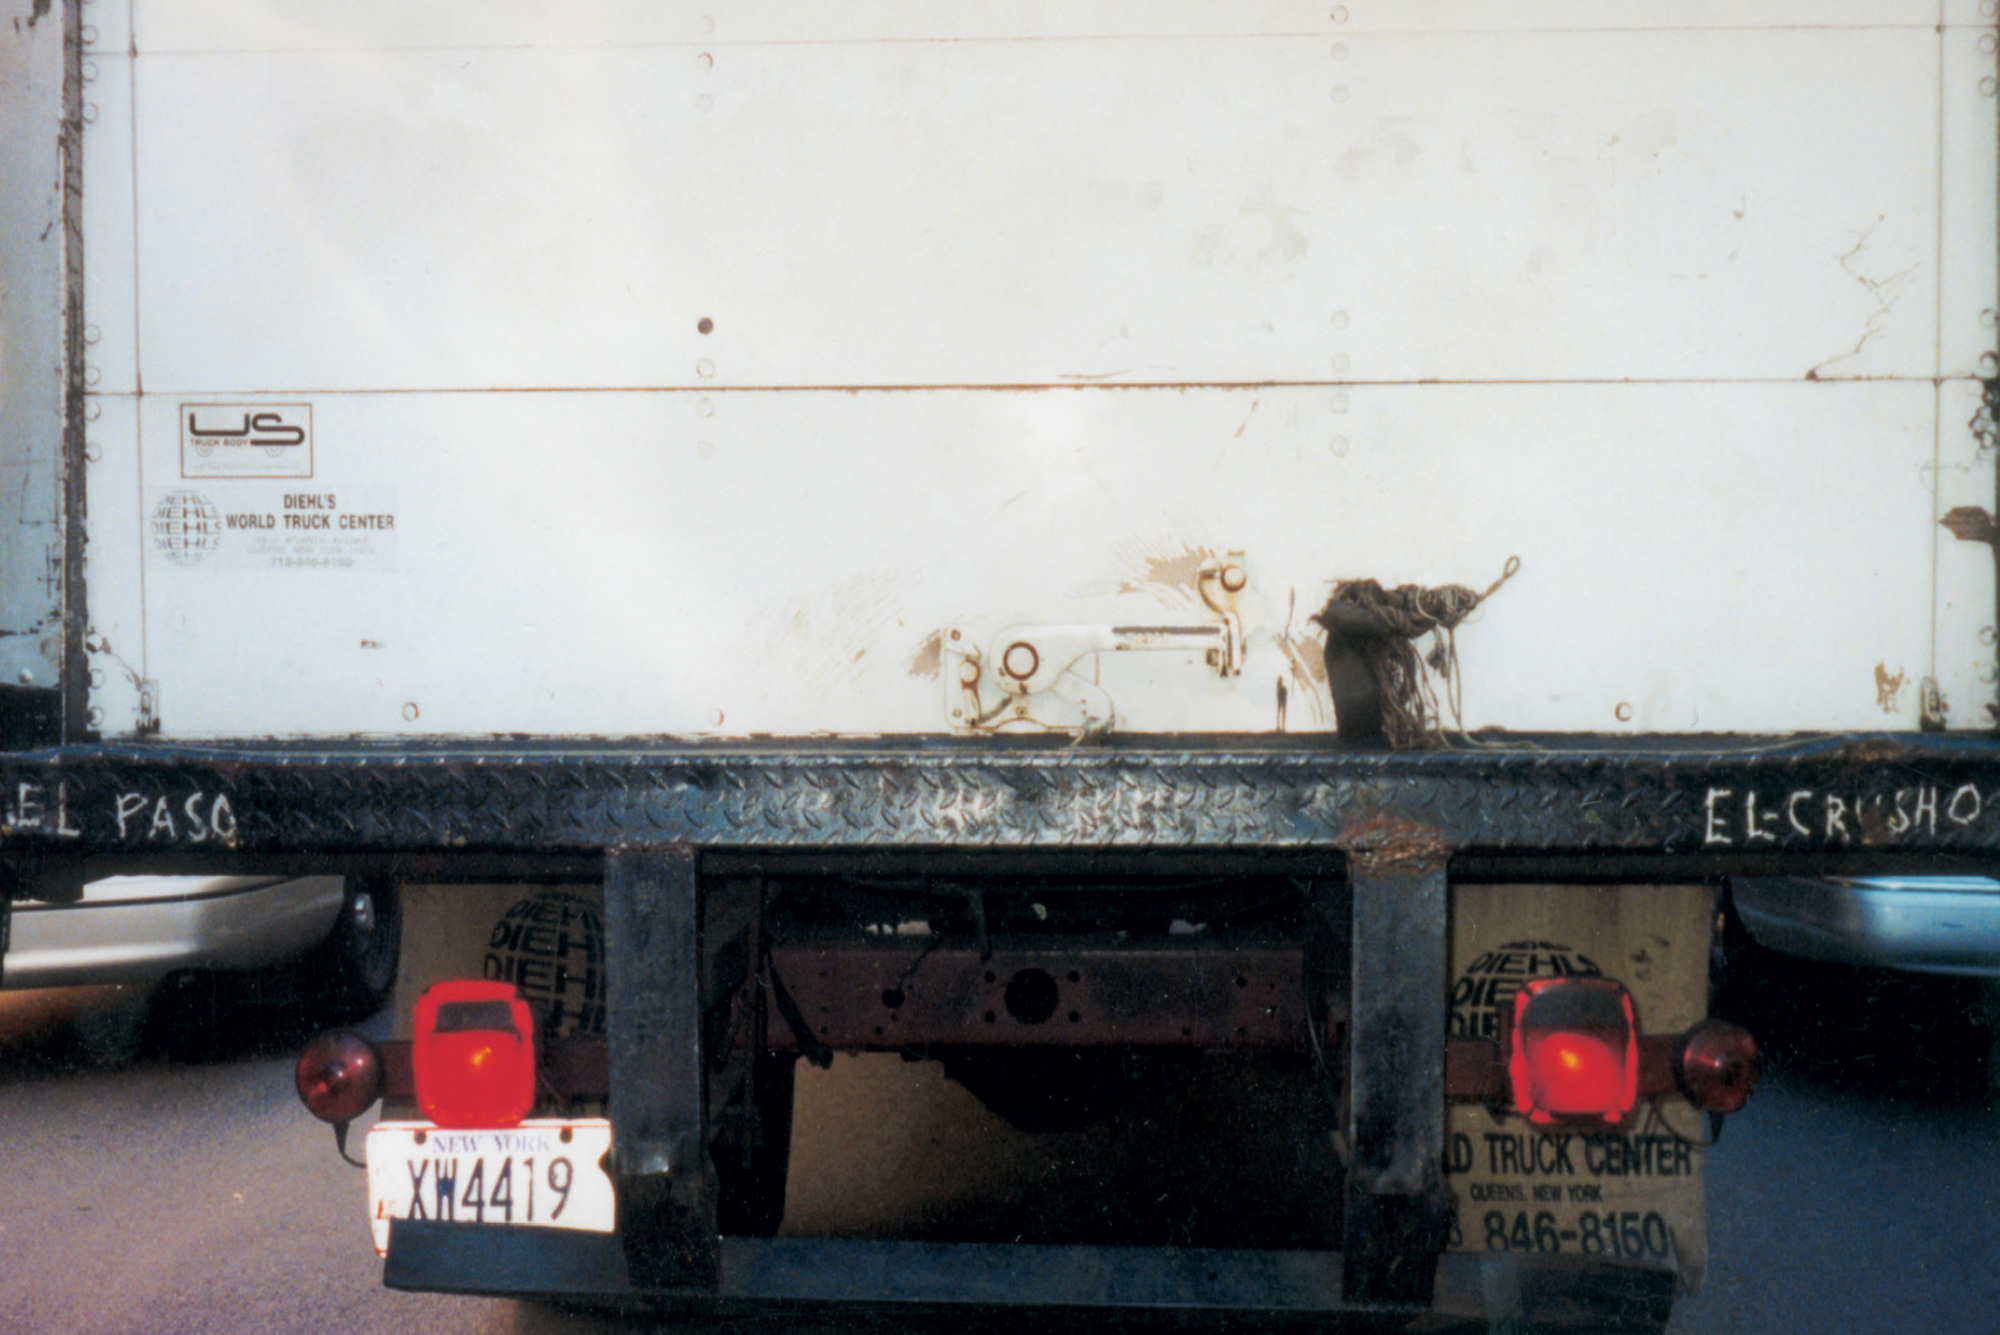 A photo by Joseph Fratesi of the back of a truck with the words 